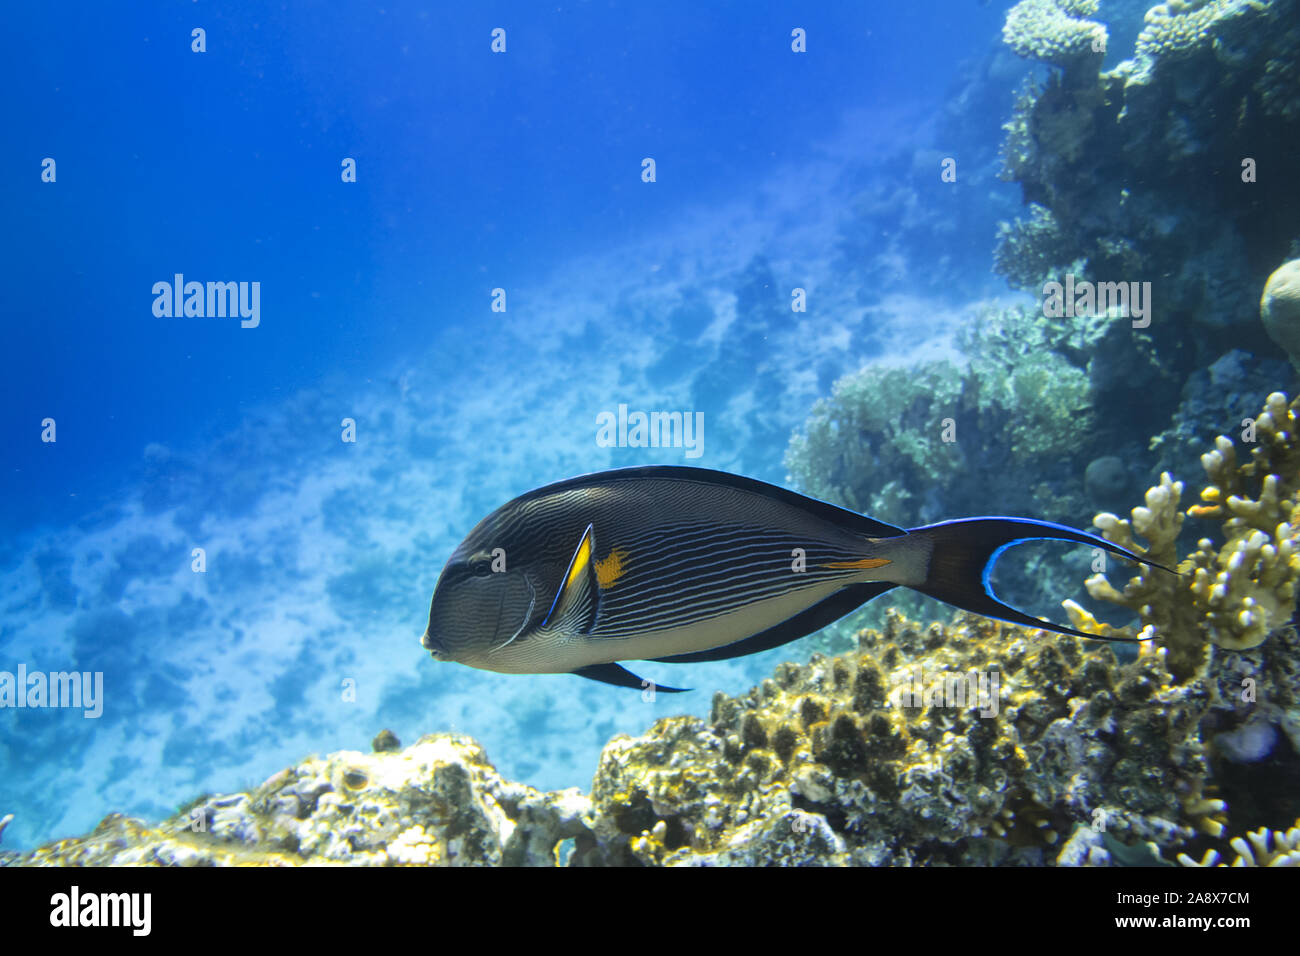 Tropical Fish In The Ocean. Sohal Surgeonfish With Black Fins, Yellow And Blue Stripes. Acanthurus Sohal In The Sea Near Coral Reef. Stock Photo